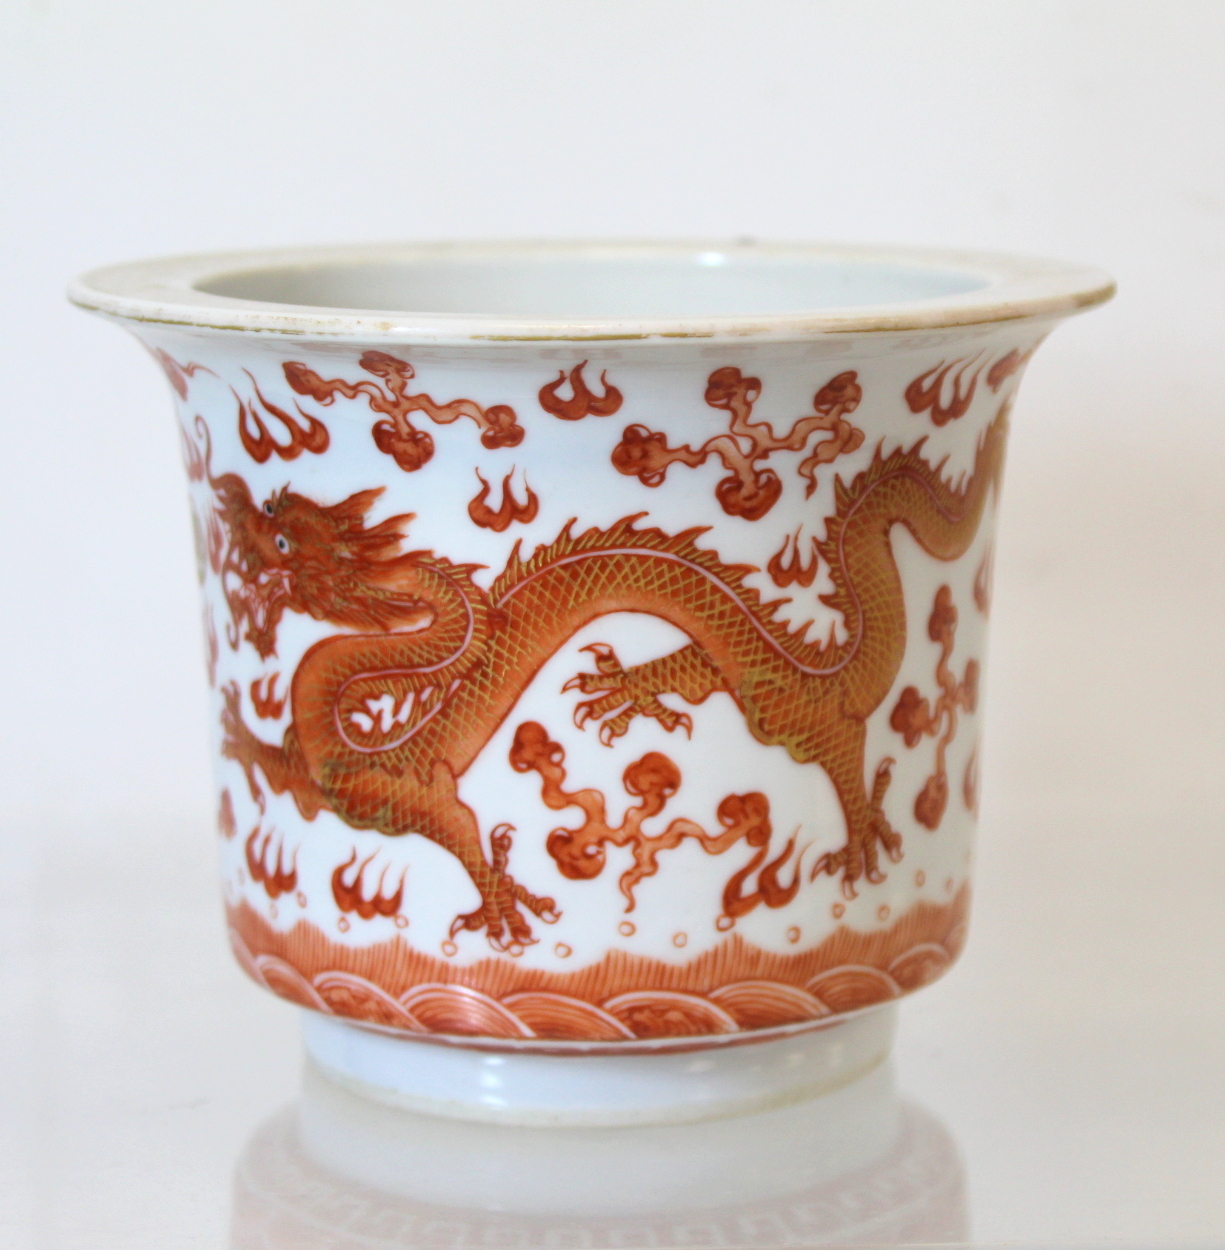 Small Chinese "Rouge de Fer" jardiniere or fern pot, decorated with dragons chasing flaming pearl. - Image 4 of 7